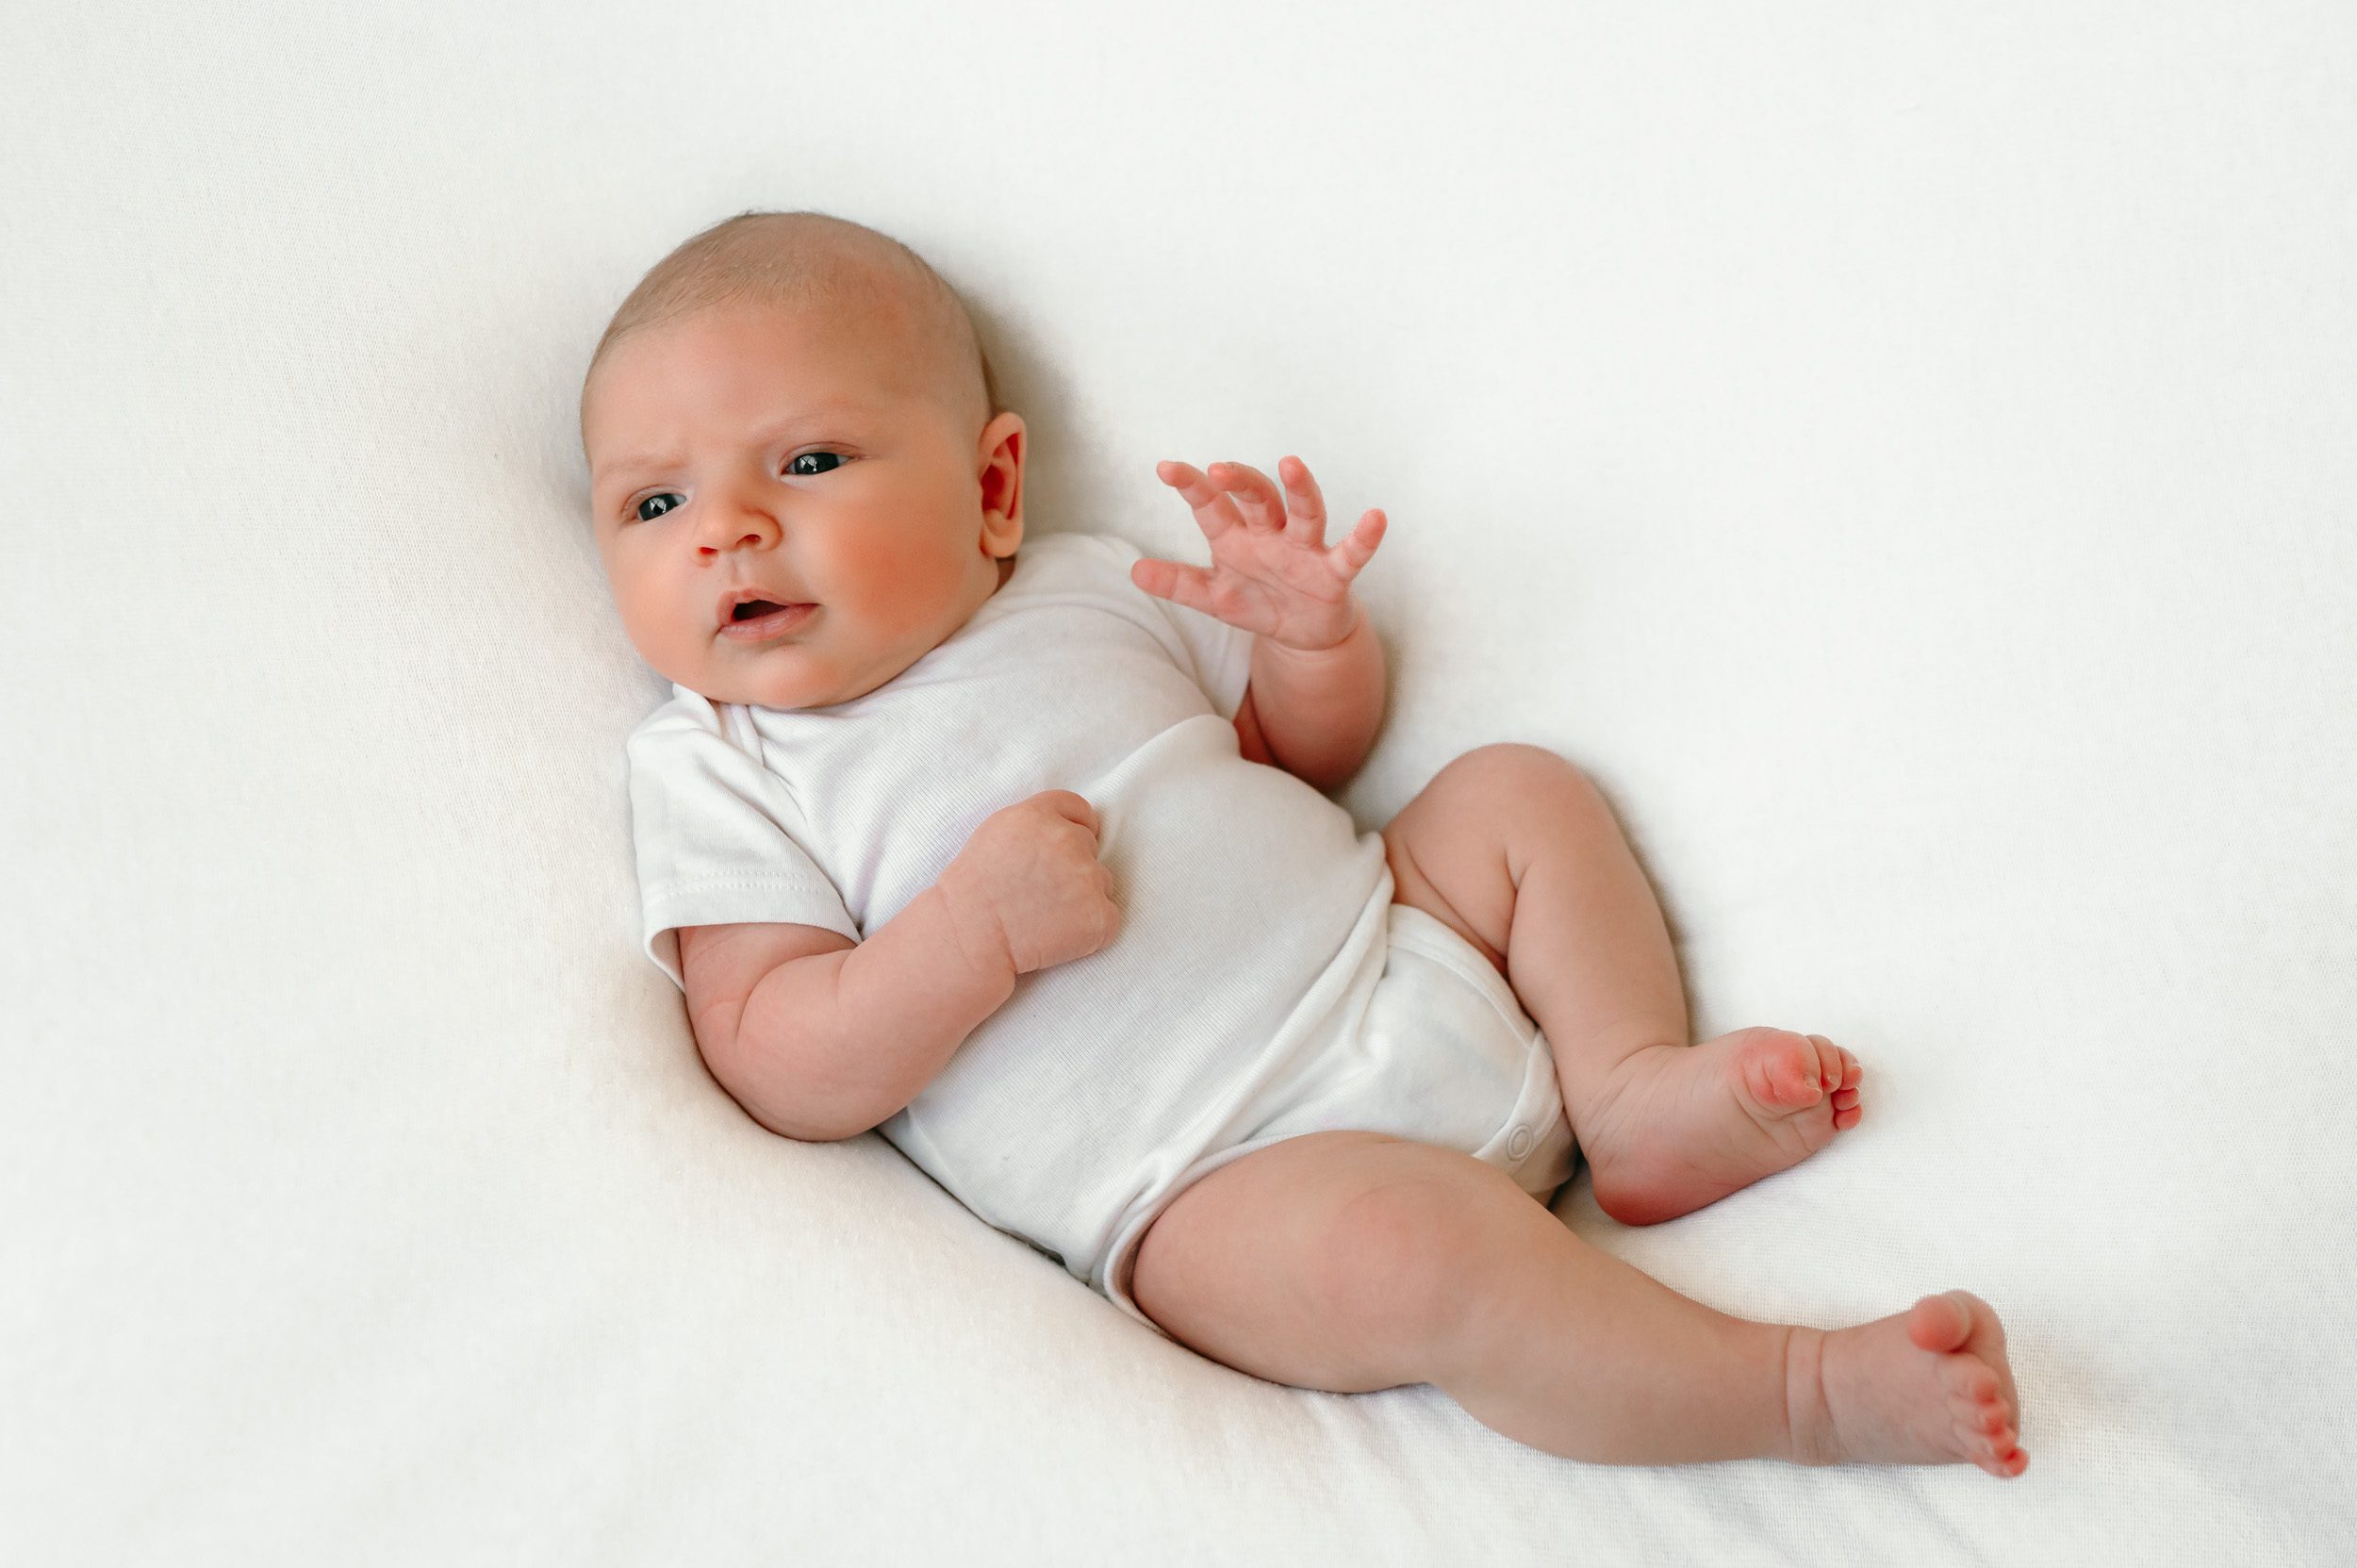  a newborn baby boy in a white onesie on a white backdrop looking toward the window light during a home newborn photoshoot